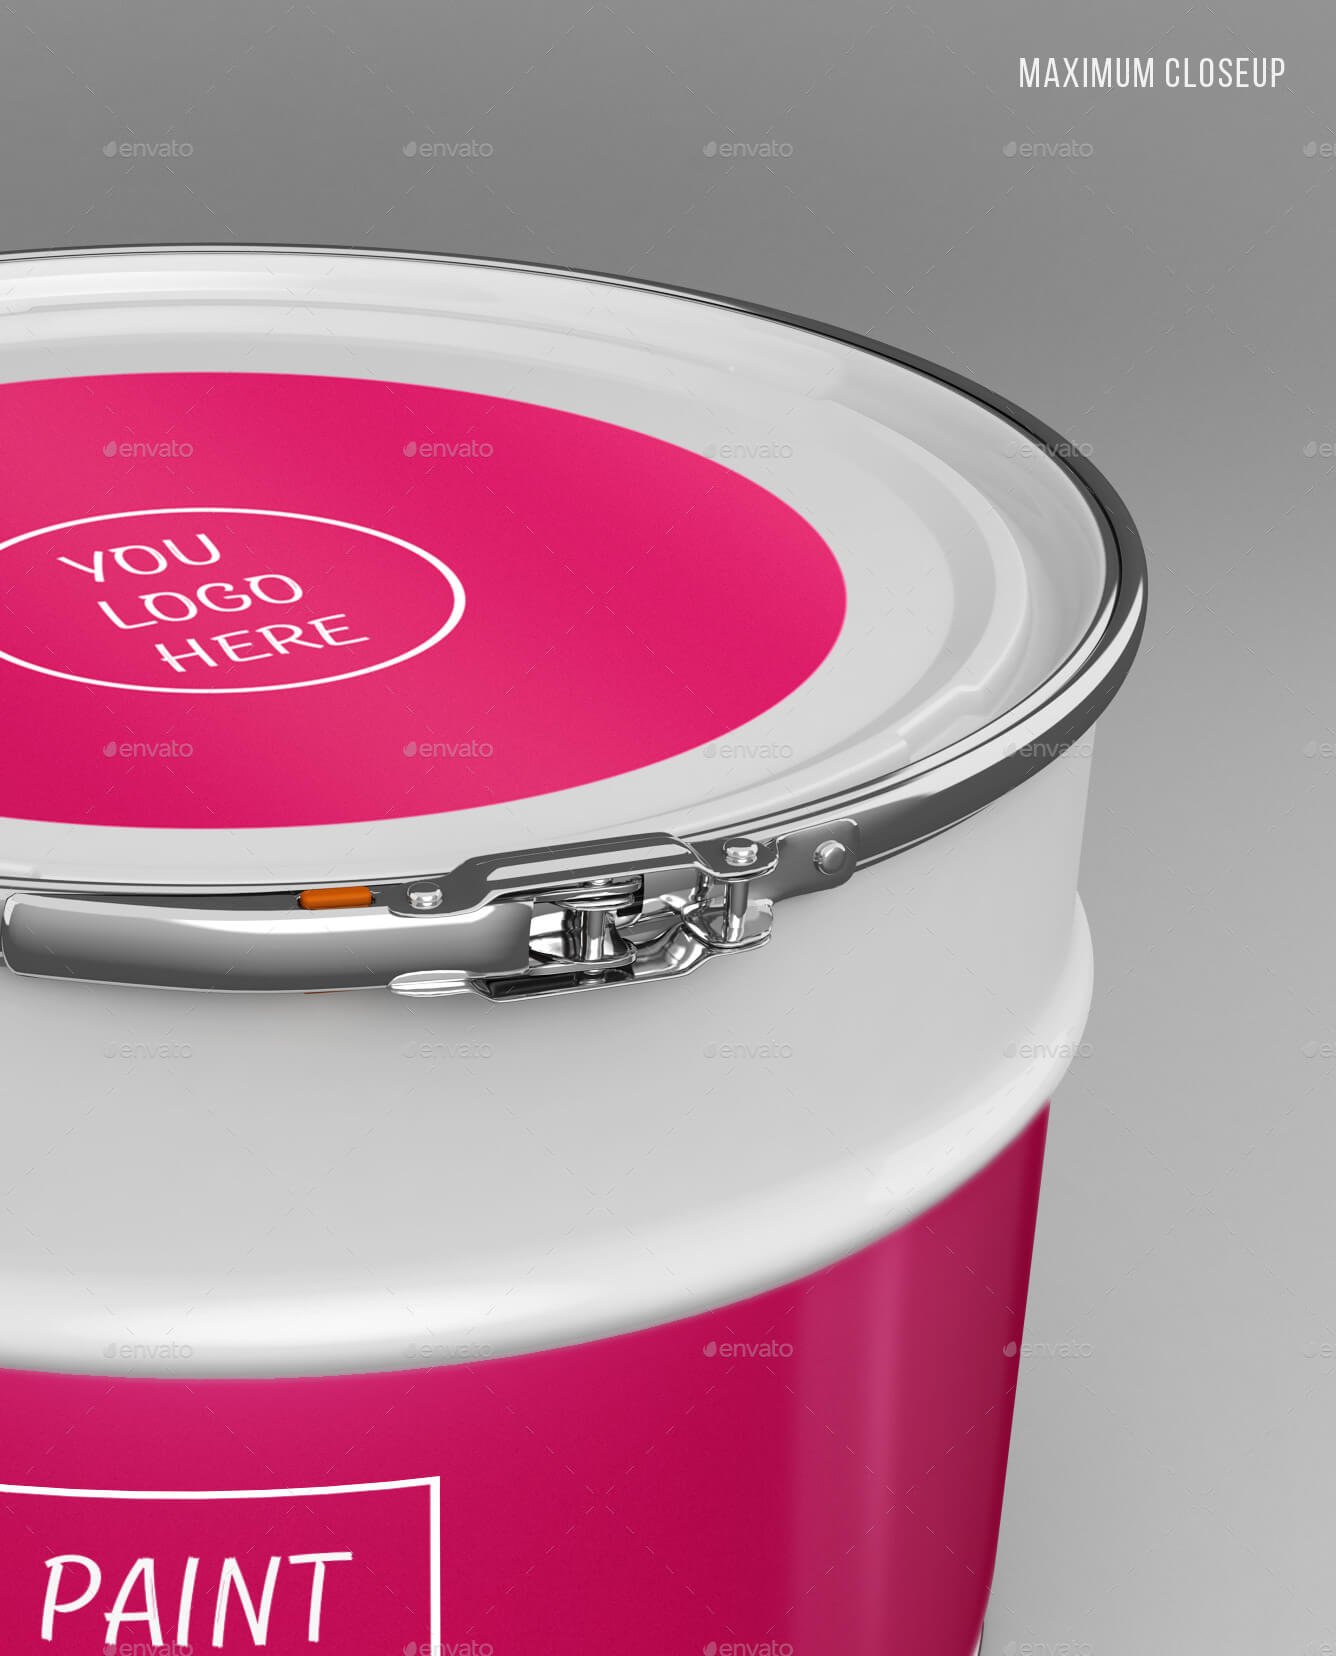 Paint Cans and Canisters Packaging Mock-Ups